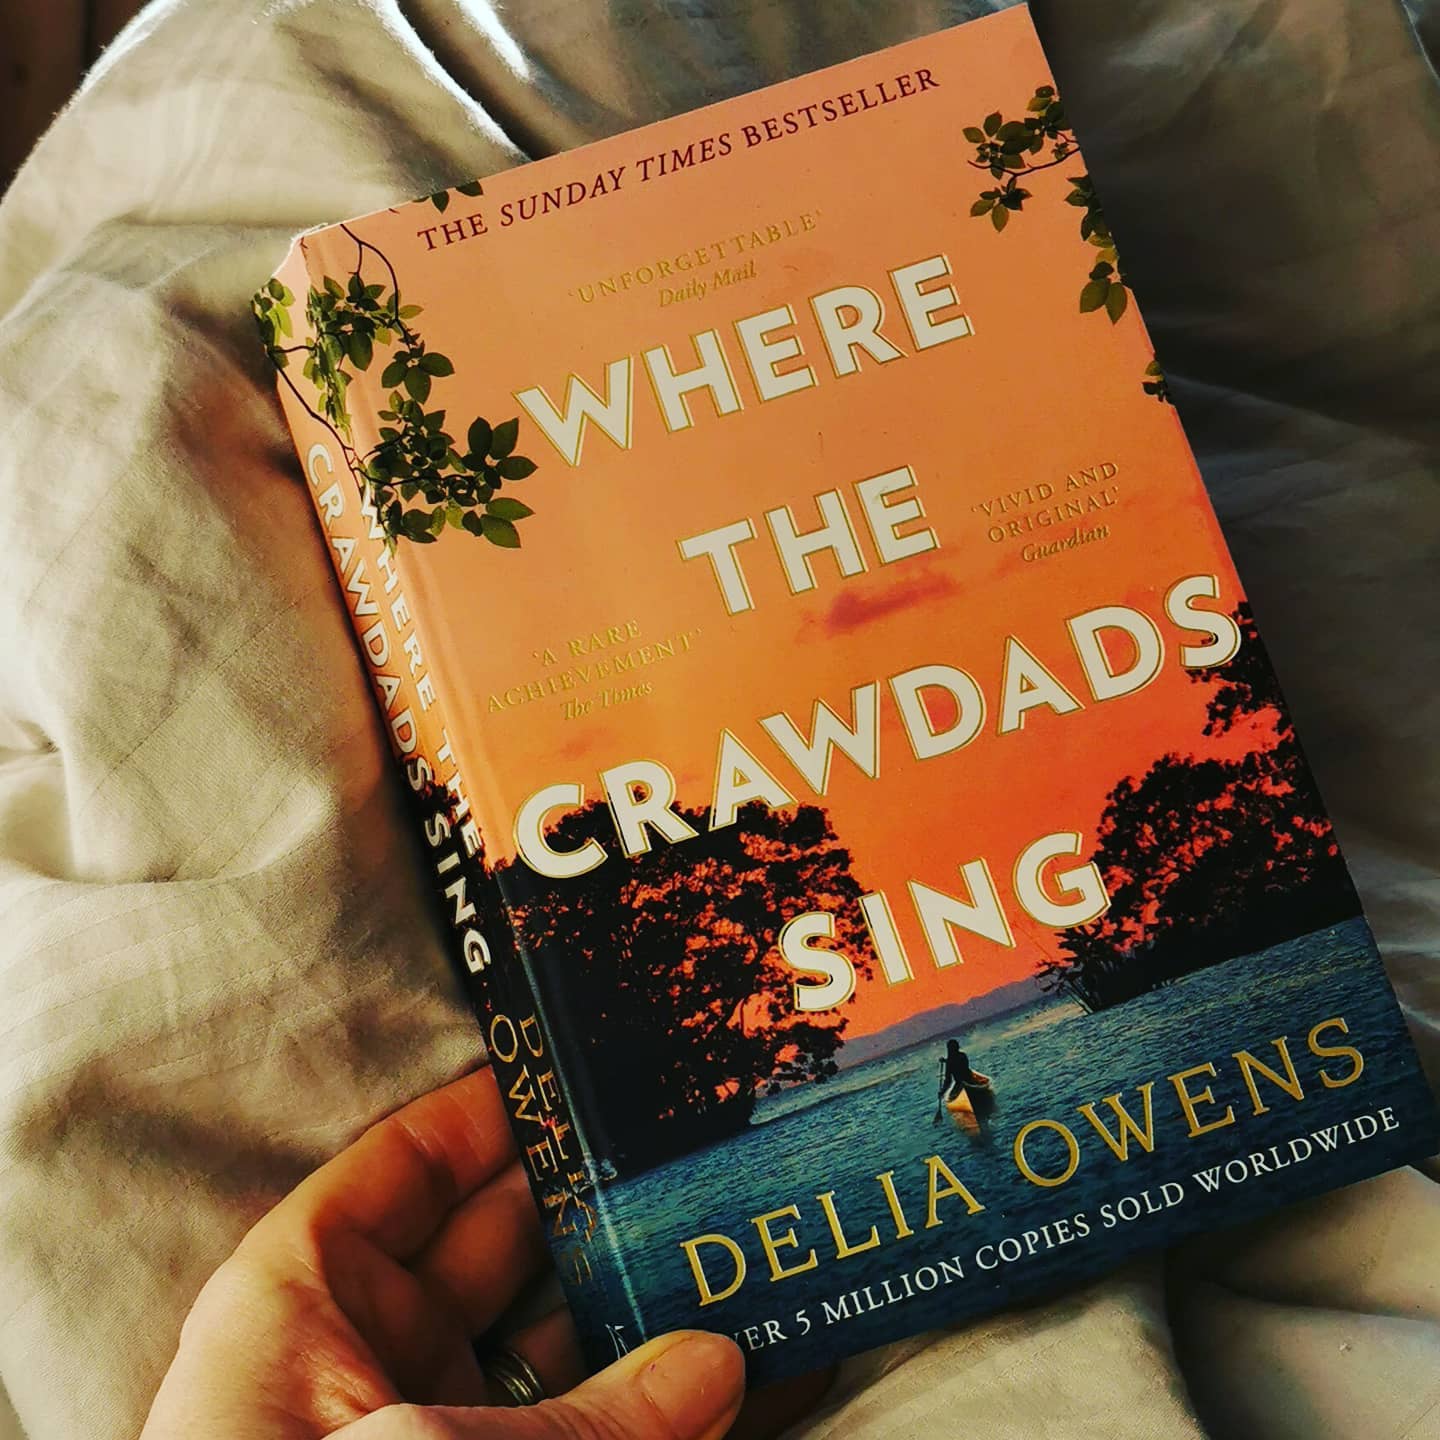 Where the crawdads sing by Delia Owems.
I just finished reading this. I sometimes find bestsellers hard to read as other people's opinions and thoughts weight heavily on my own. It's not that I allow other reader's thoughts intrude on mine, it's just that I don't want to offend a fellow reader's book taste.
This is a taste thing. I feel grumpy after reading this book. I appreciate the author's writing of the landscape and nature. I appreciate the different idea of a girl living in a marsh in seclusion. I appreciate how the girl's isolation is depicted. All these elements work well.
What didn't work for me as a reader was the mish mash of genres. Is this book a Mills and boons as it certainly verges into that that at times. Is it a crime thriller? Kinda but the court scenes where the main character is set before a jury are so weak, boring and the dialogue needs reworking. Is it a film script? Oh yes, it is and that's the main problem for me. I know that when we write that images are conjured up can be film like but this story or novel really feels like it was written or rewritten with a silver screen on mind. Especially the ending which I was not one bit surprised by.
Apparently Daisy Edgar Jones is being mentioned to play Kya, the main character. Let's hope Daisy can make Kya somewhat appealing or fun to be with. I couldn't understand why anyone would want to spend time with Kya as she was portrayed as being joyless.
Gosh this is harsh and now it's awkward but I have to ask what did you think of the best selling novel/film that is the Crawdads?